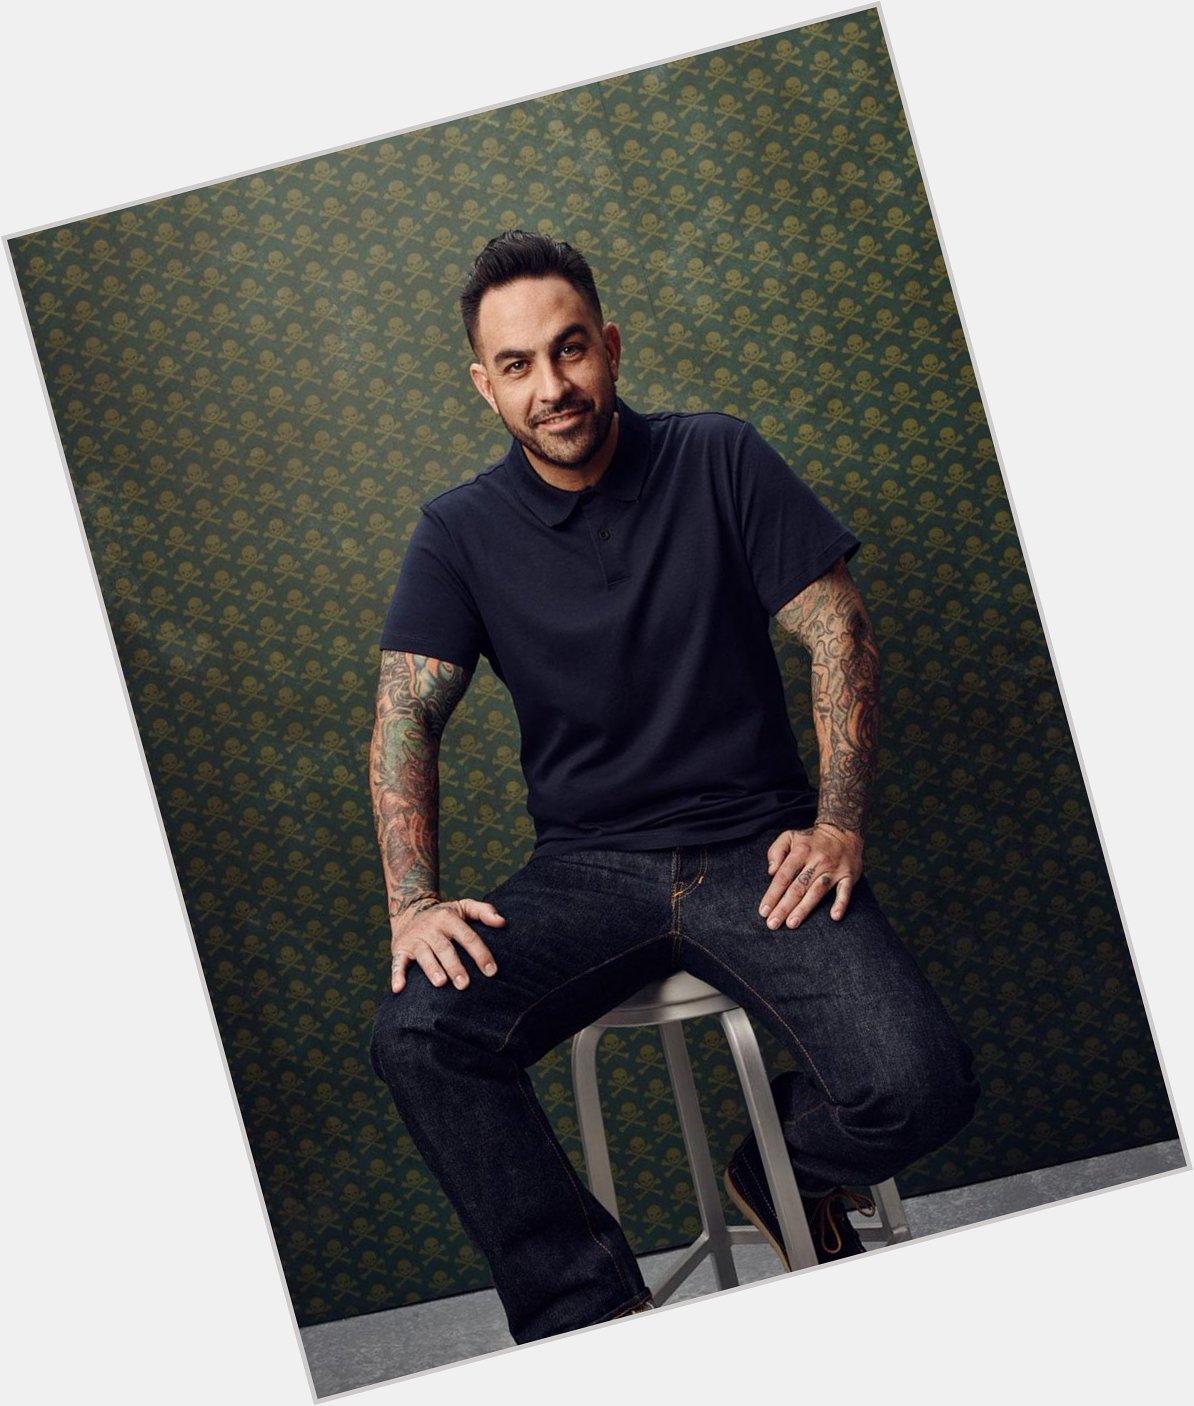 Happy Birthday, Chris Nunez! See you at the judges table this summer. 